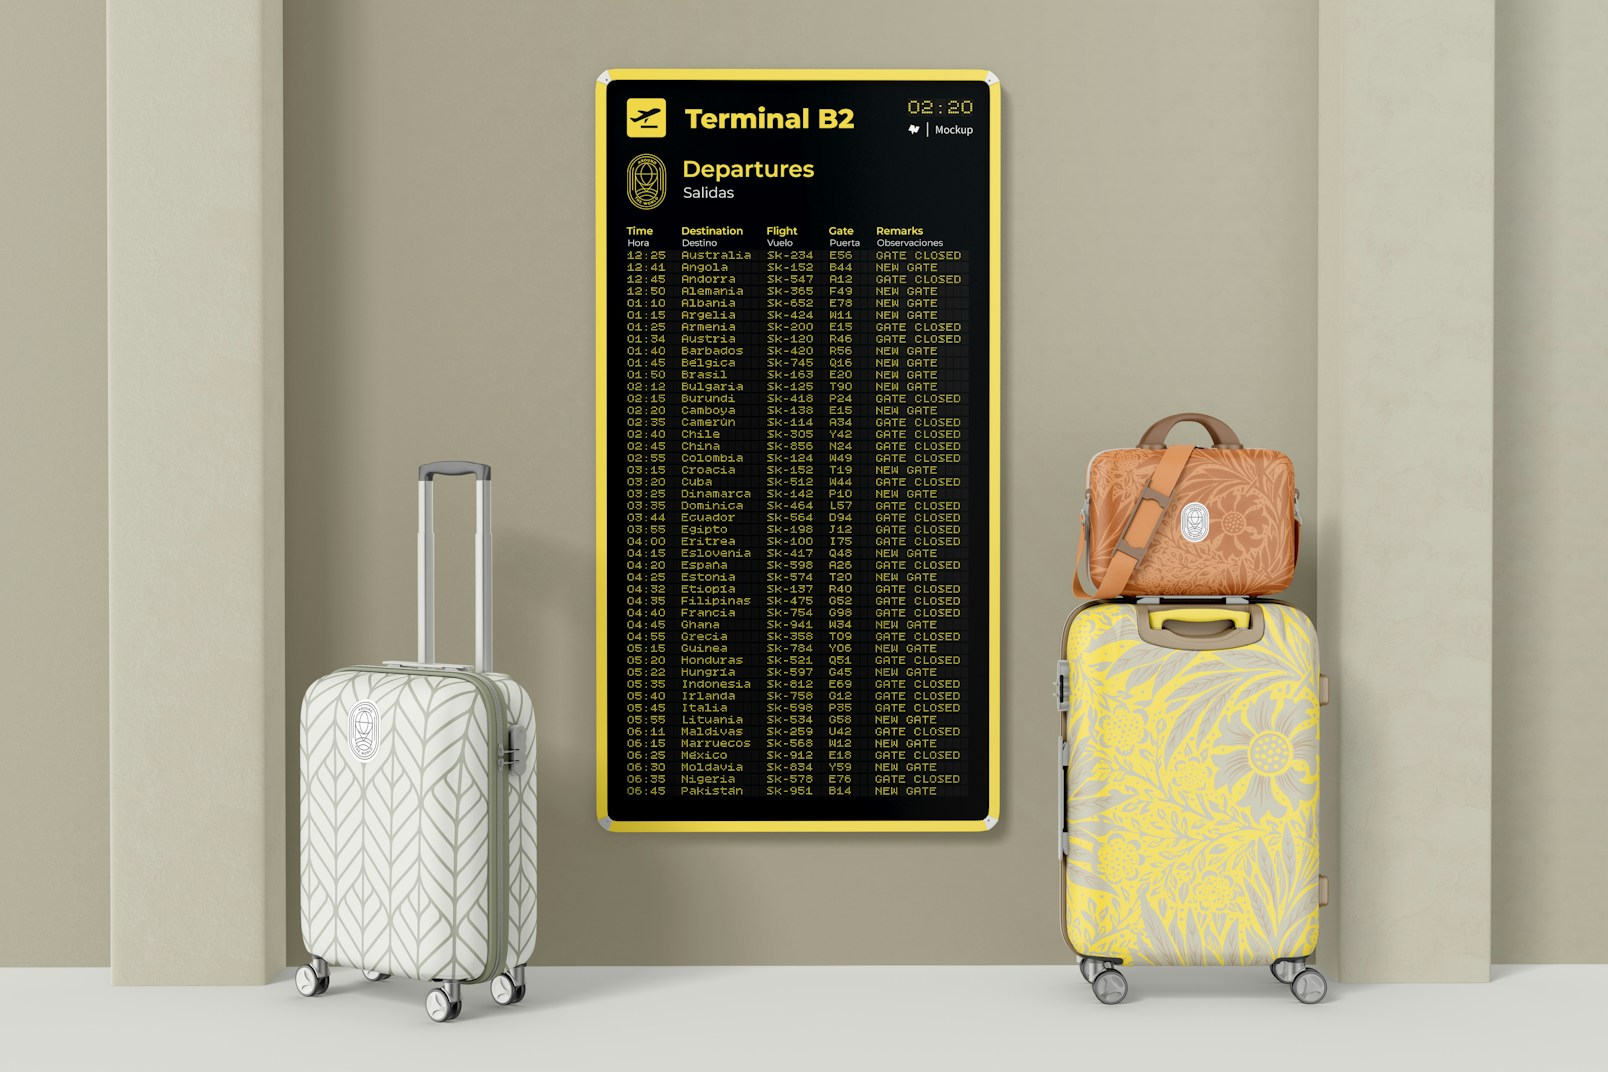 Airport Screen Mockup, with Luggage